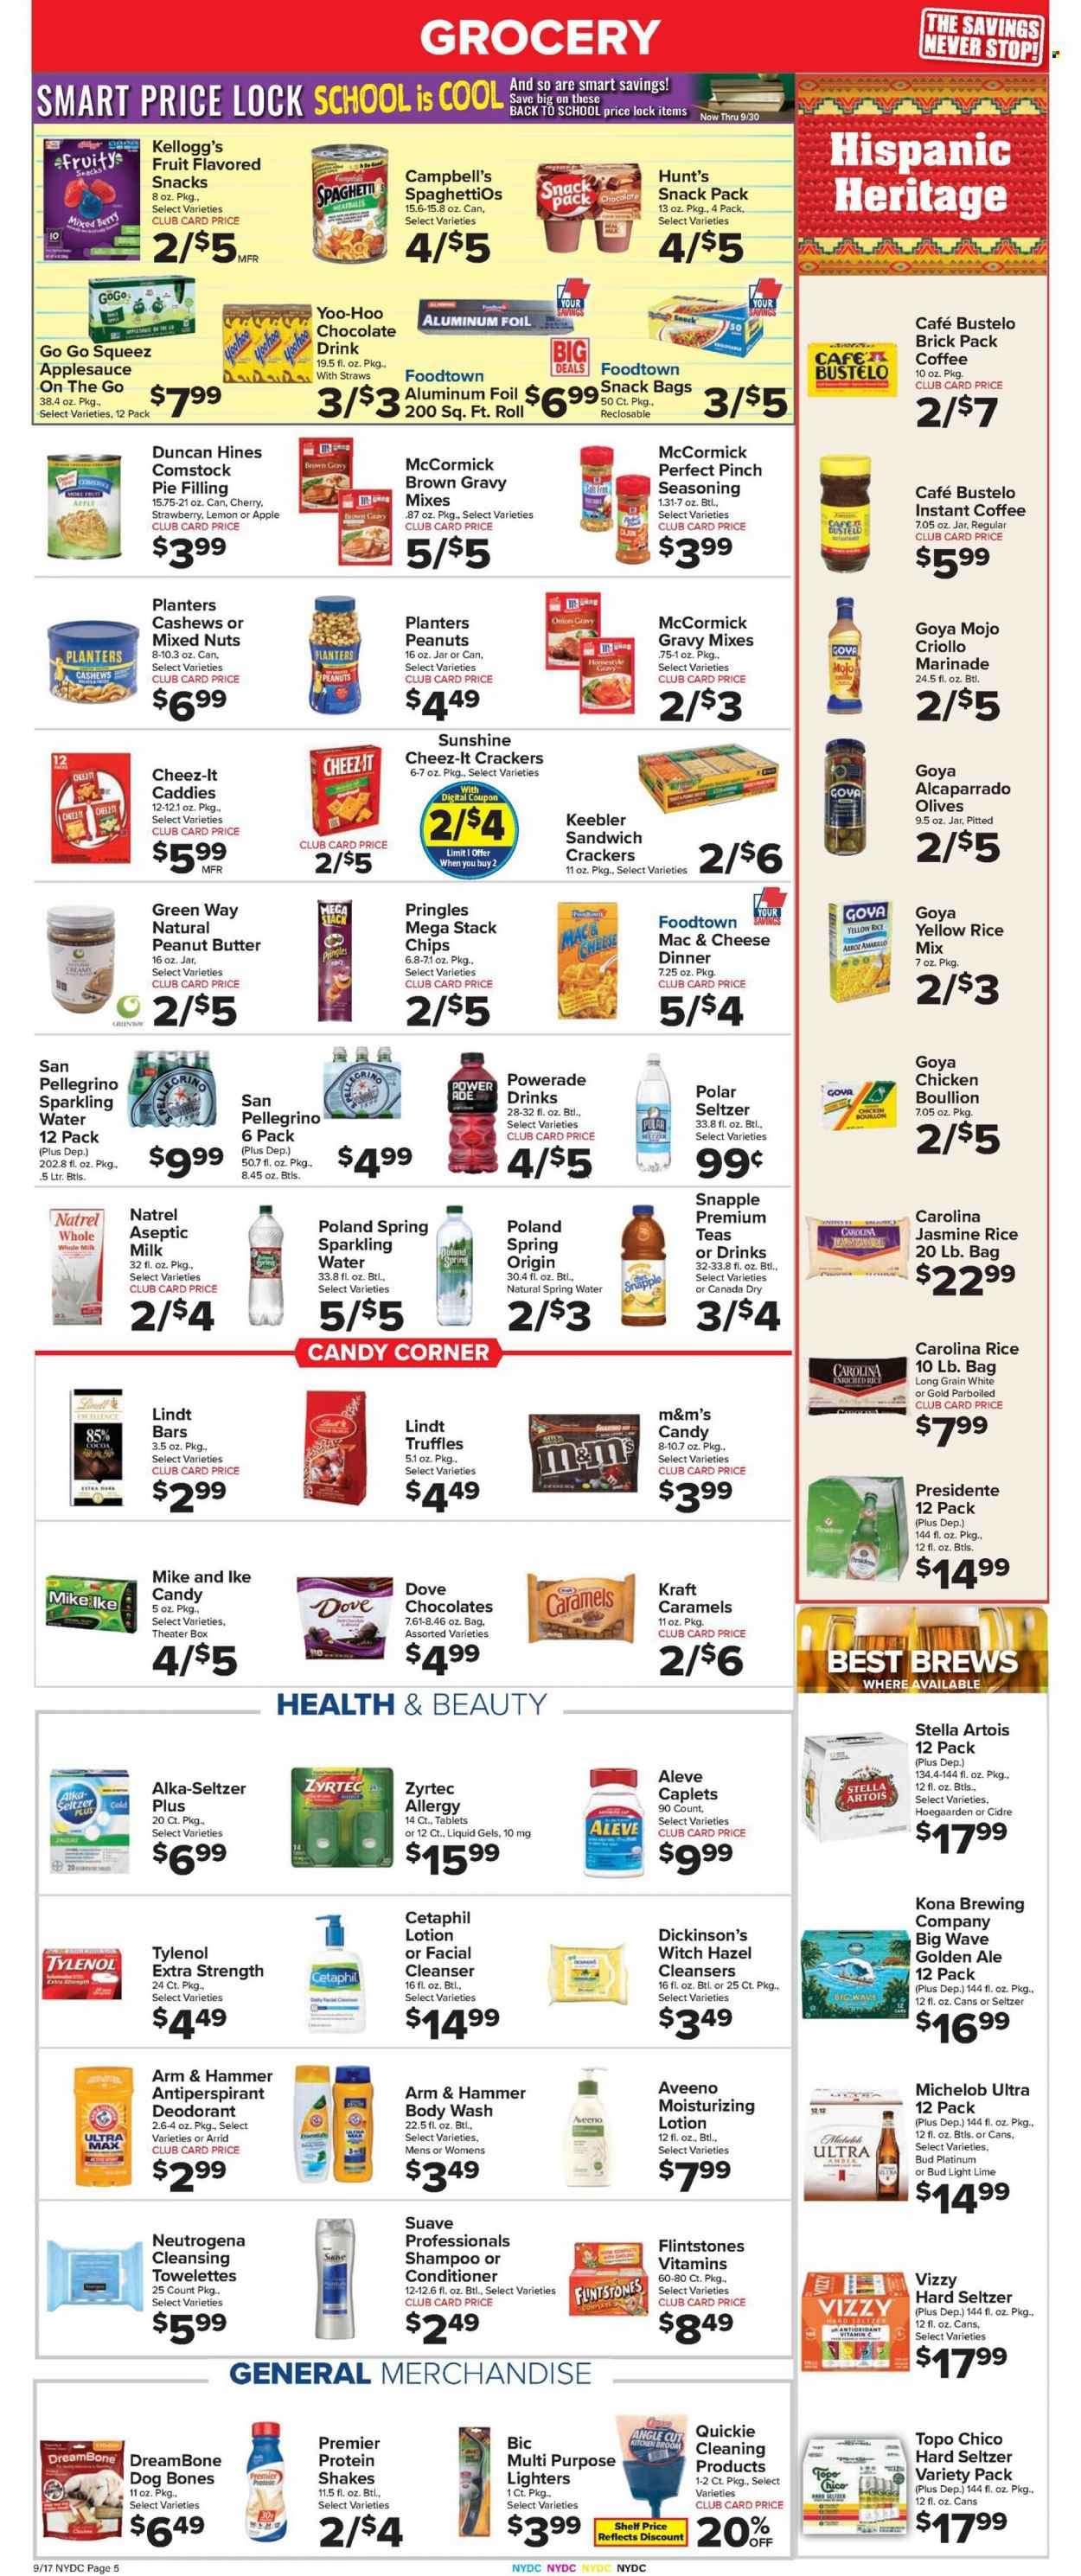 thumbnail - Foodtown Flyer - 09/17/2021 - 09/23/2021 - Sales products - Campbell's, Kraft®, milk, protein drink, shake, Sunshine, chocolate, Lindt, truffles, M&M's, crackers, Kellogg's, Keebler, Pringles, chips, Cheez-It, ARM & HAMMER, pie filling, olives, Goya, jasmine rice, parboiled rice, spice, homestyle gravy, onion gravy, marinade, apple sauce, peanut butter, cashews, peanuts, mixed nuts, Planters, Canada Dry, Powerade, Snapple, spring water, sparkling water, San Pellegrino, chocolate drink, instant coffee, Hard Seltzer, beer, Bud Light, Aveeno, Dove, WAVE, body wash, shampoo, Suave, cleanser, Neutrogena, conditioner, body lotion, anti-perspirant, deodorant, BIC, broom, straw, aluminium foil, Aleve, Tylenol, vitamin c, Zyrtec, Alka-seltzer, Stella Artois, Michelob. Page 7.